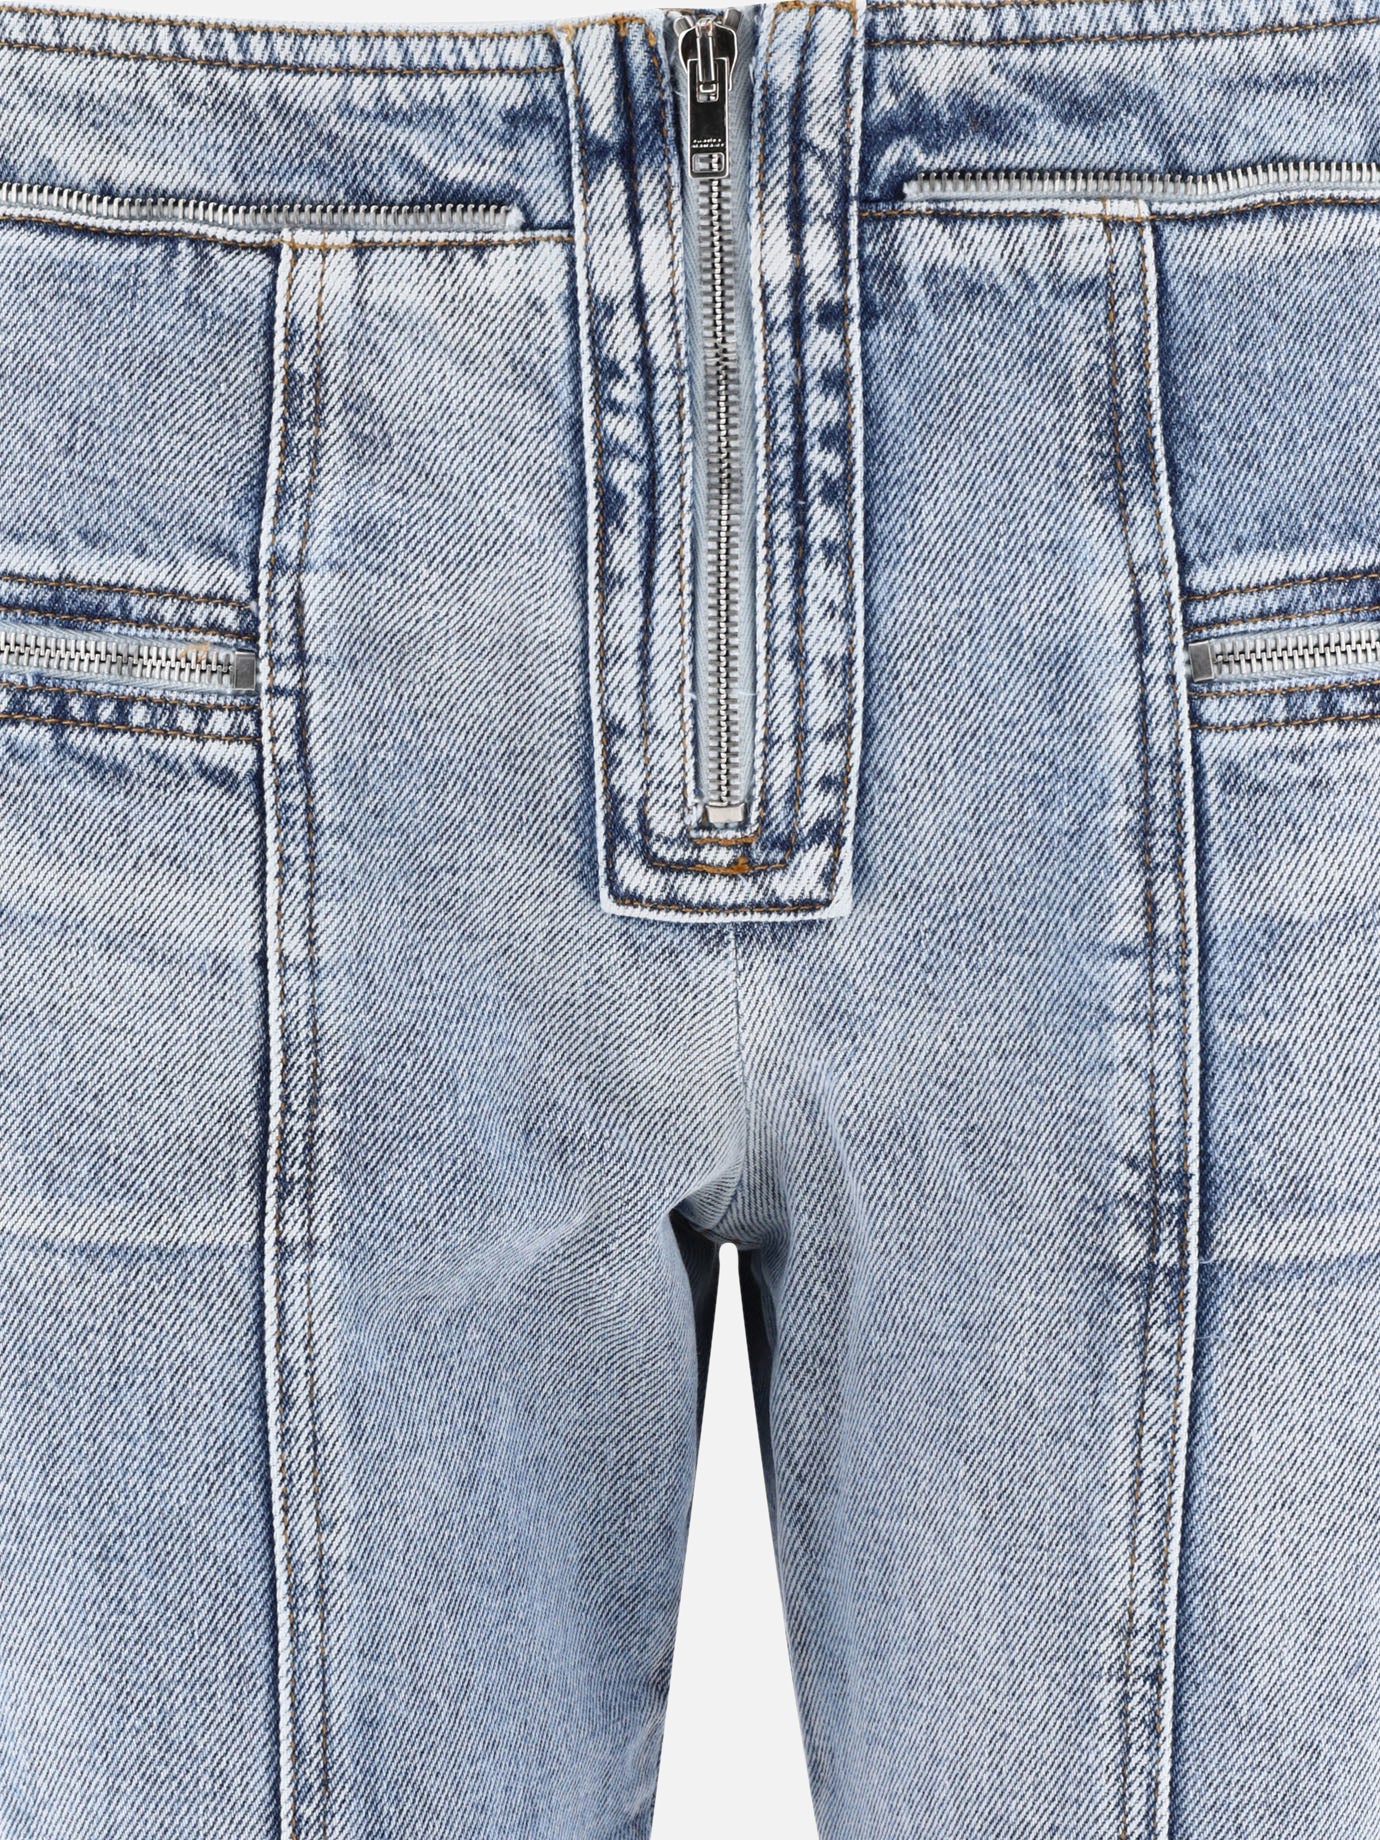 "Loma" jeans